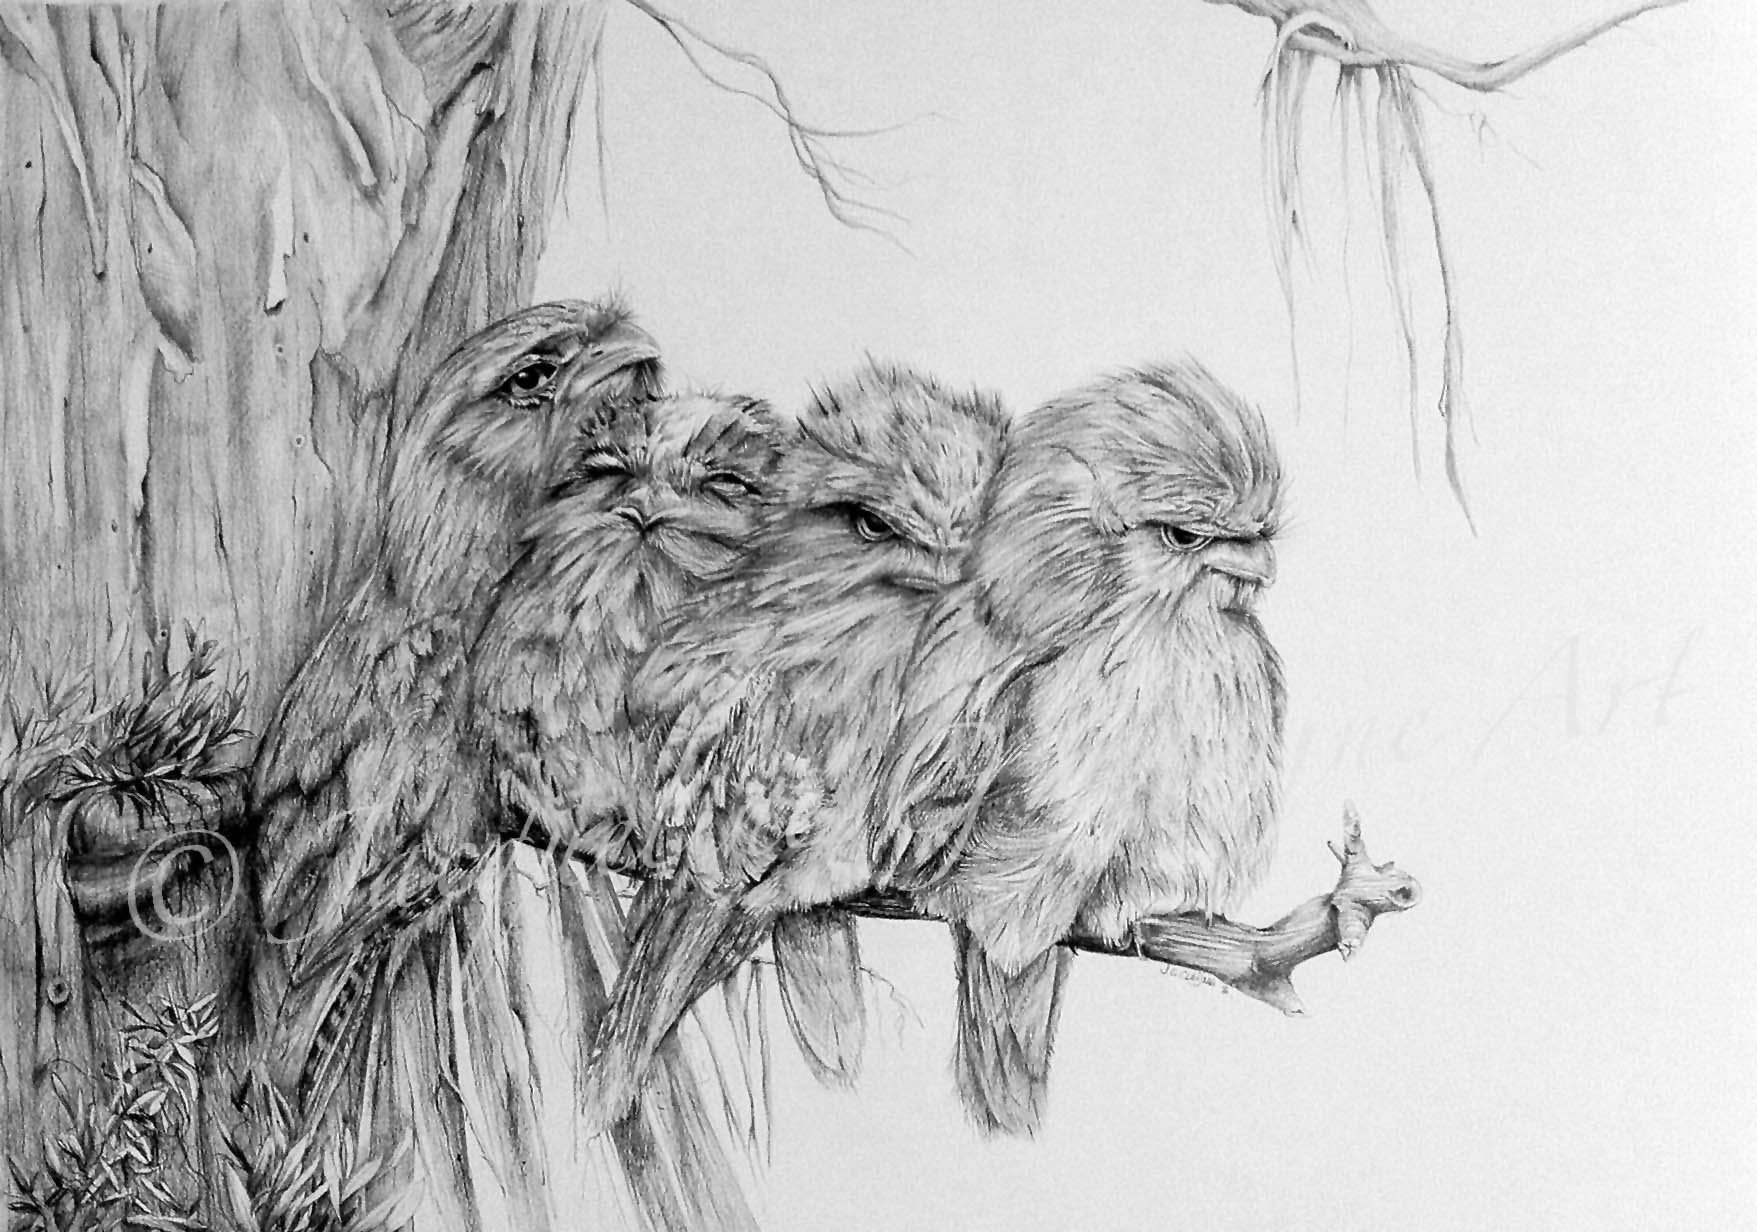 Tawny Frogmouth Family Series - SOLD